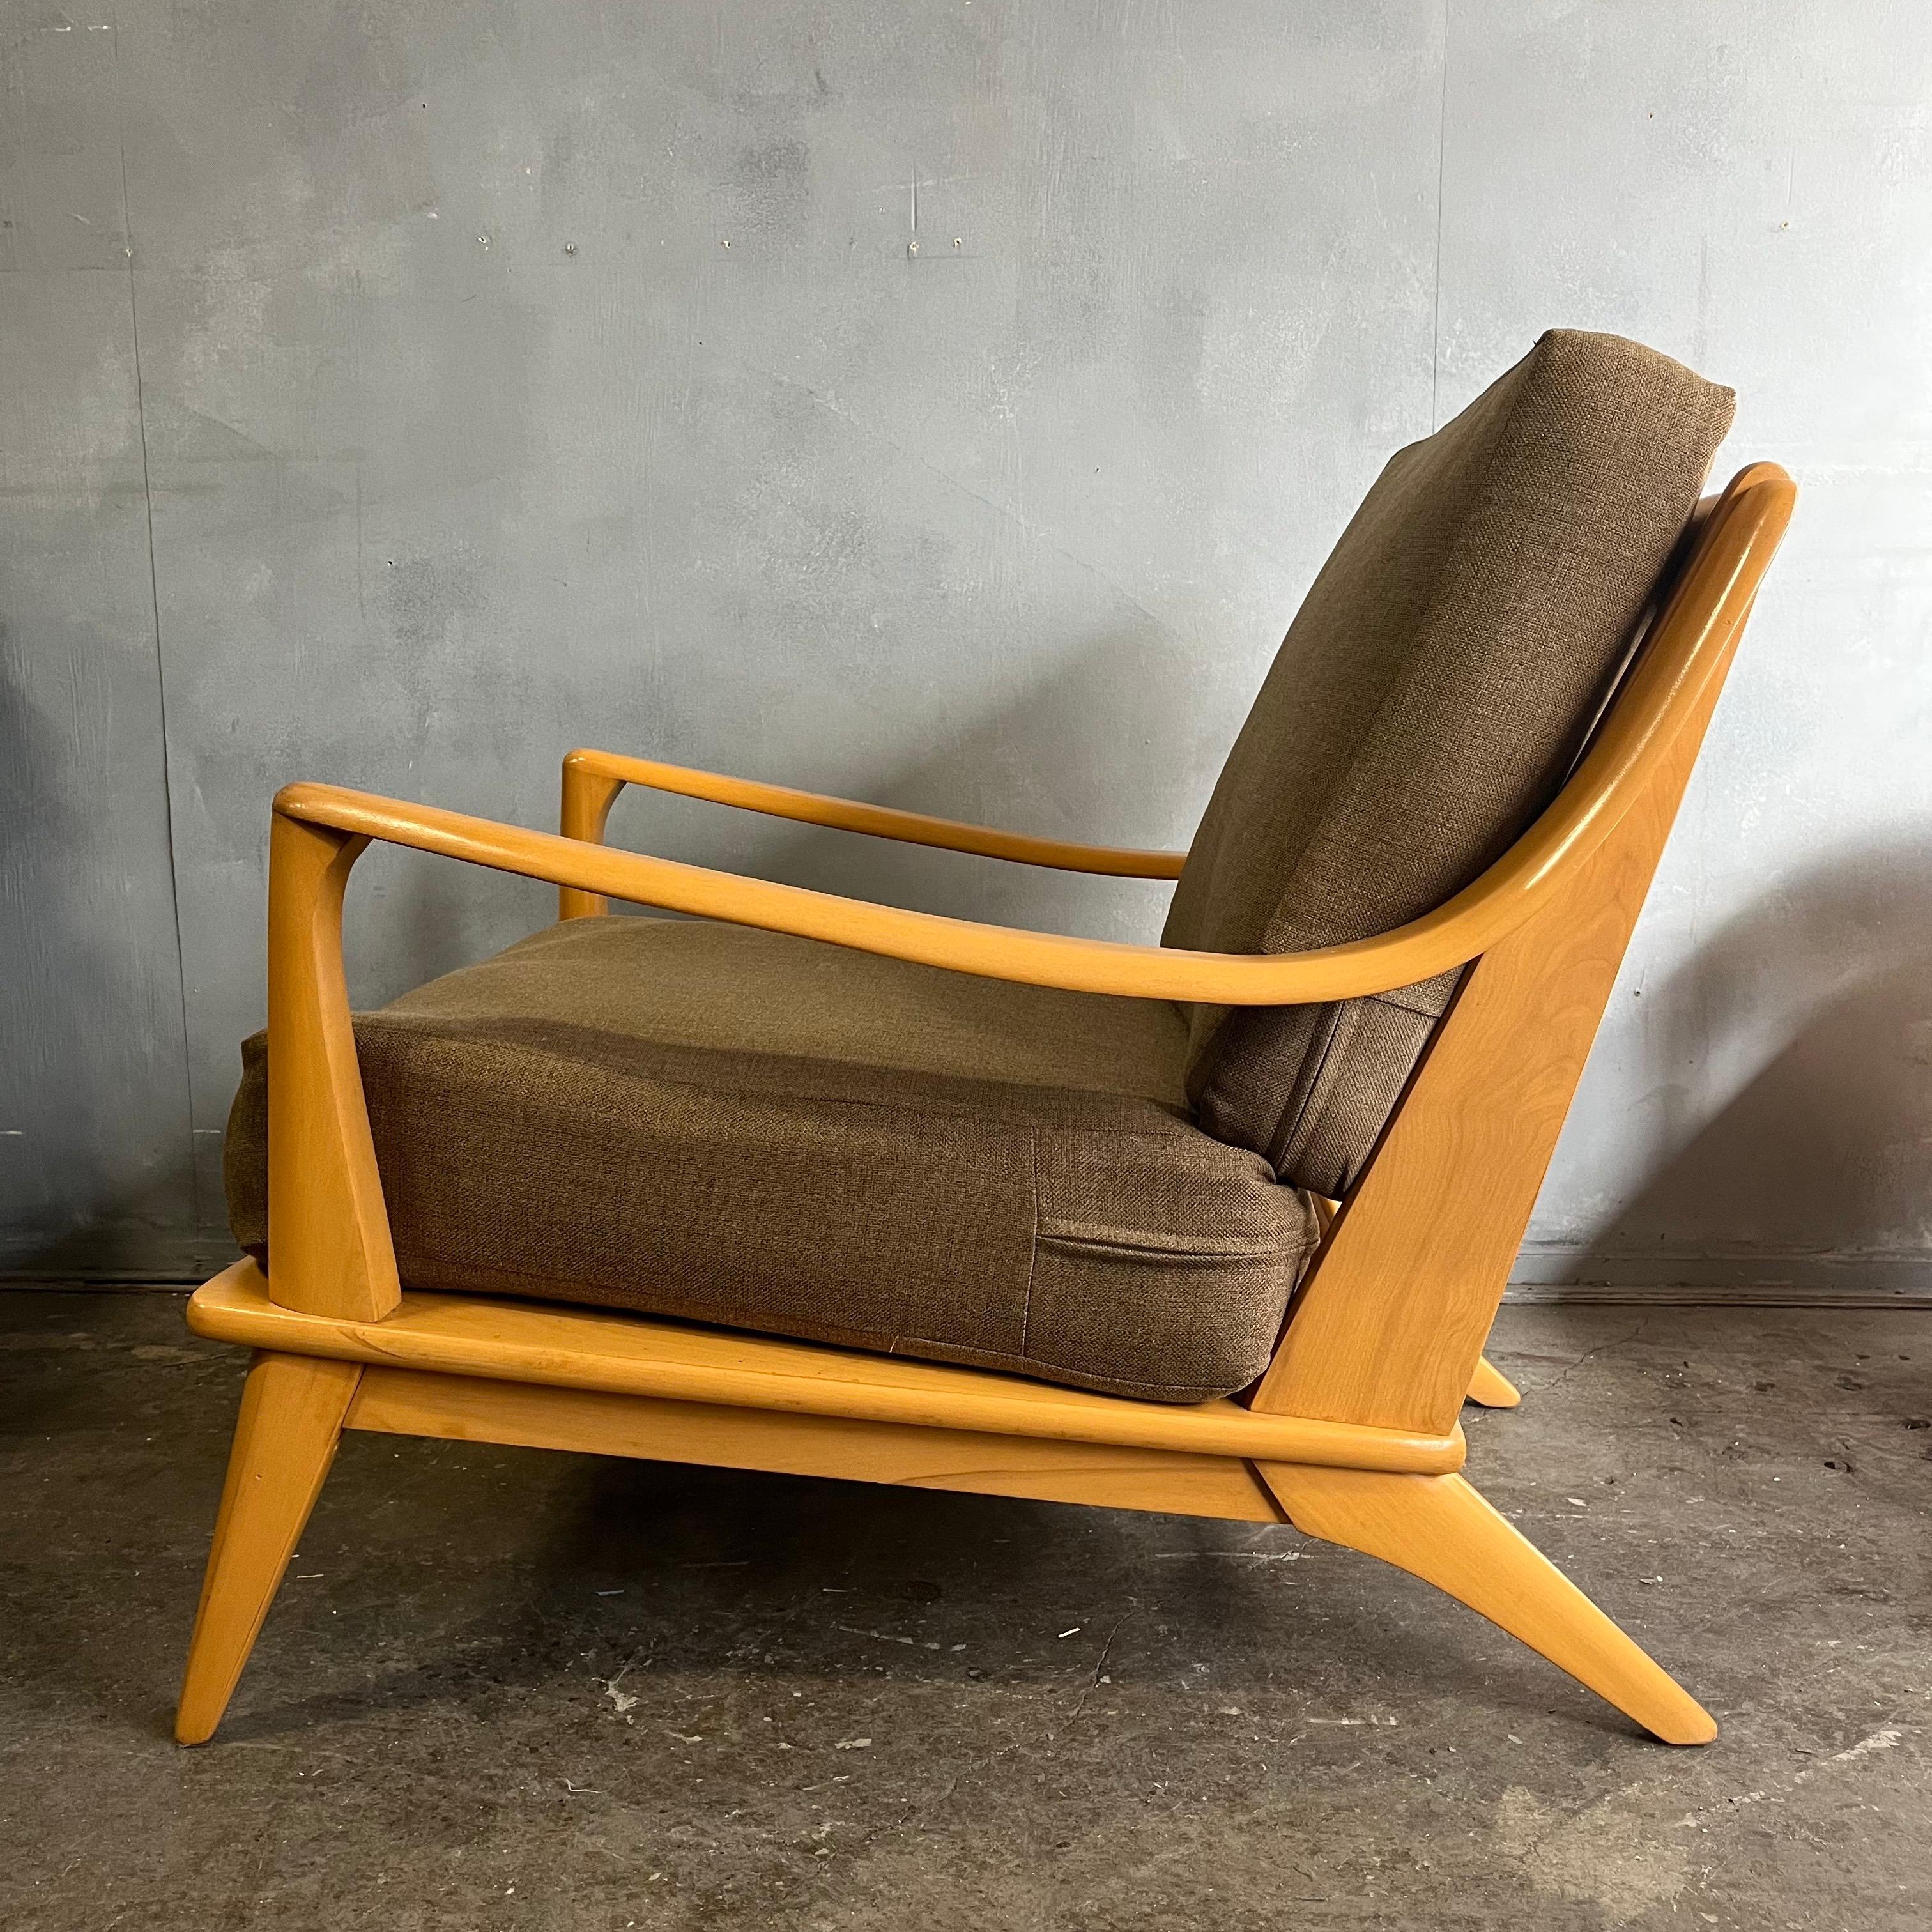 Wonderful condition heywood wakefield lounge chair CM929 davenport and CM927 armchair in the champagne finish.